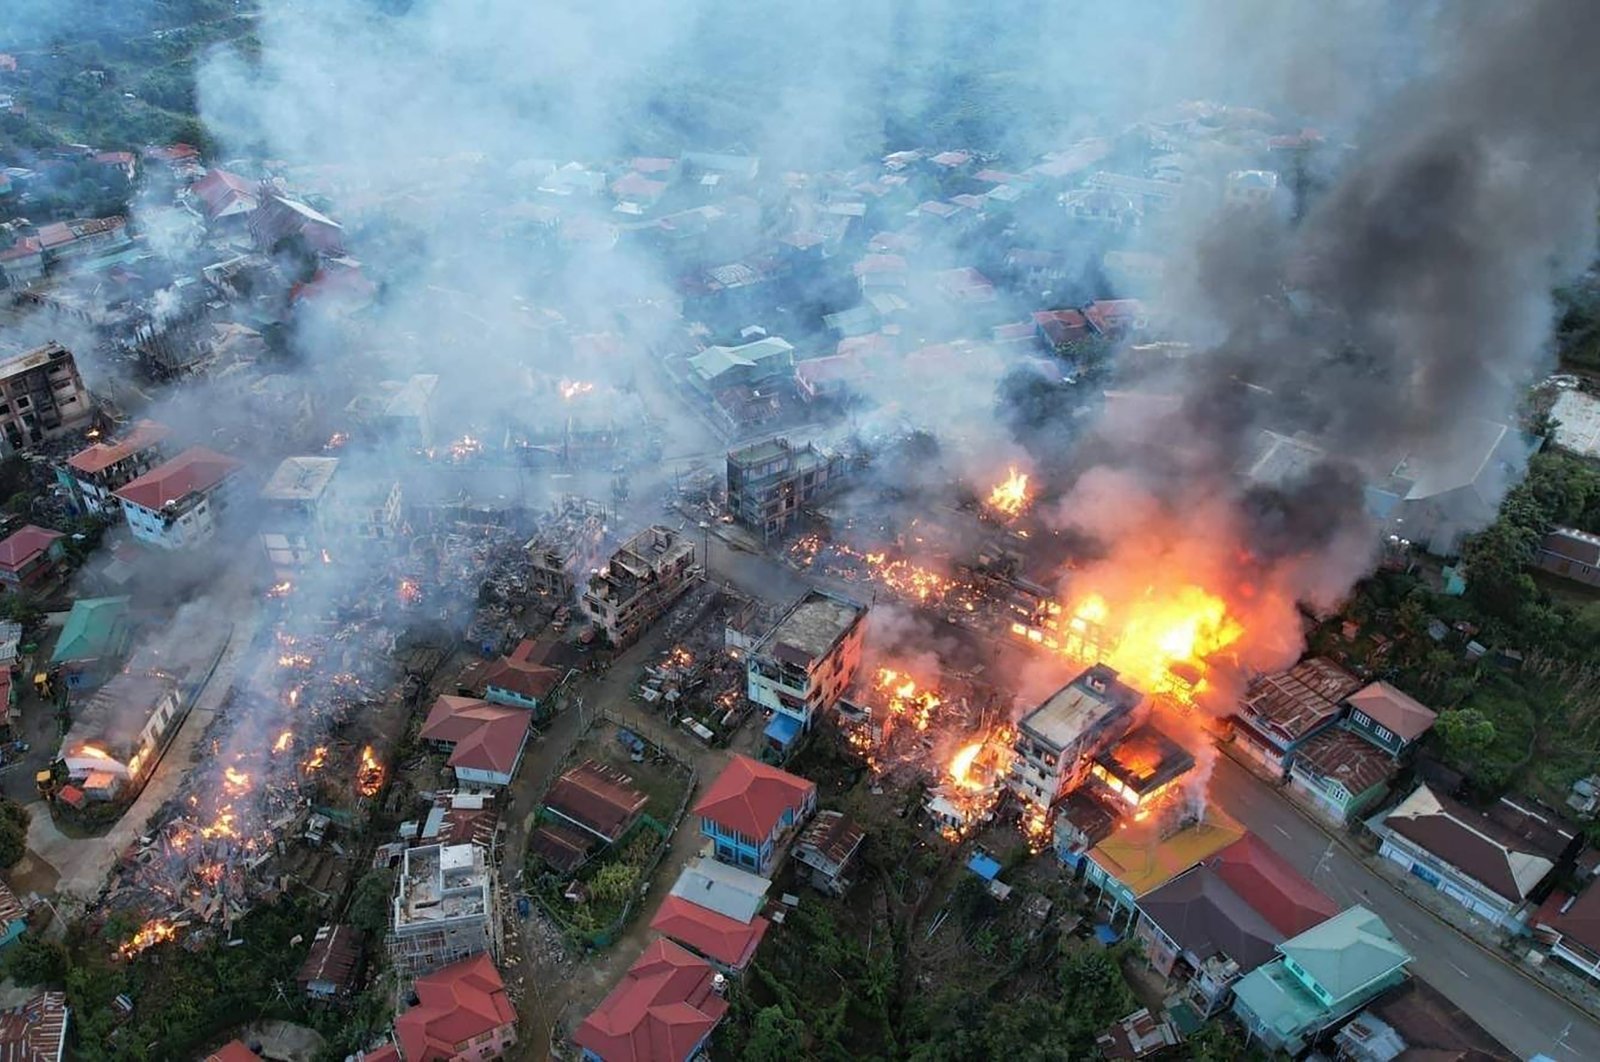 In this photo, fires can be seen in the town of Thantlang in Myanmar's northwestern state of Chin, on Friday, Oct. 29, 2021. (Photo by AP)